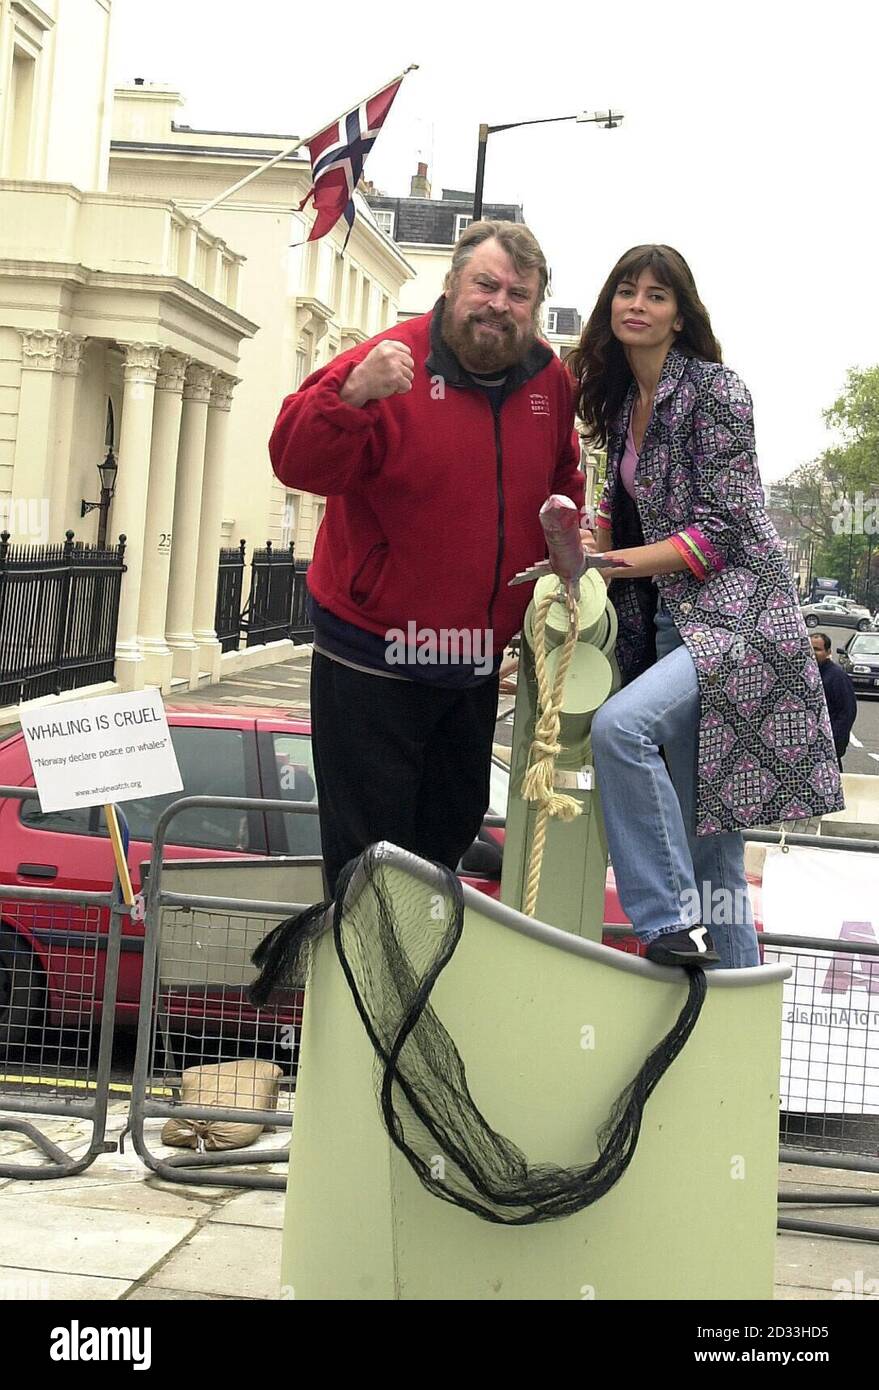 Model Lisa B and actor Brian Blessed join an anti-whaling protest outside the Norwegian Embassy in London on the opening day of Norway's whaling season during which 670 whales are expected to be killed. Although commercial whaling has been banned since 1986, over 20,000 whales have been killed since the ban came into force. Stock Photo